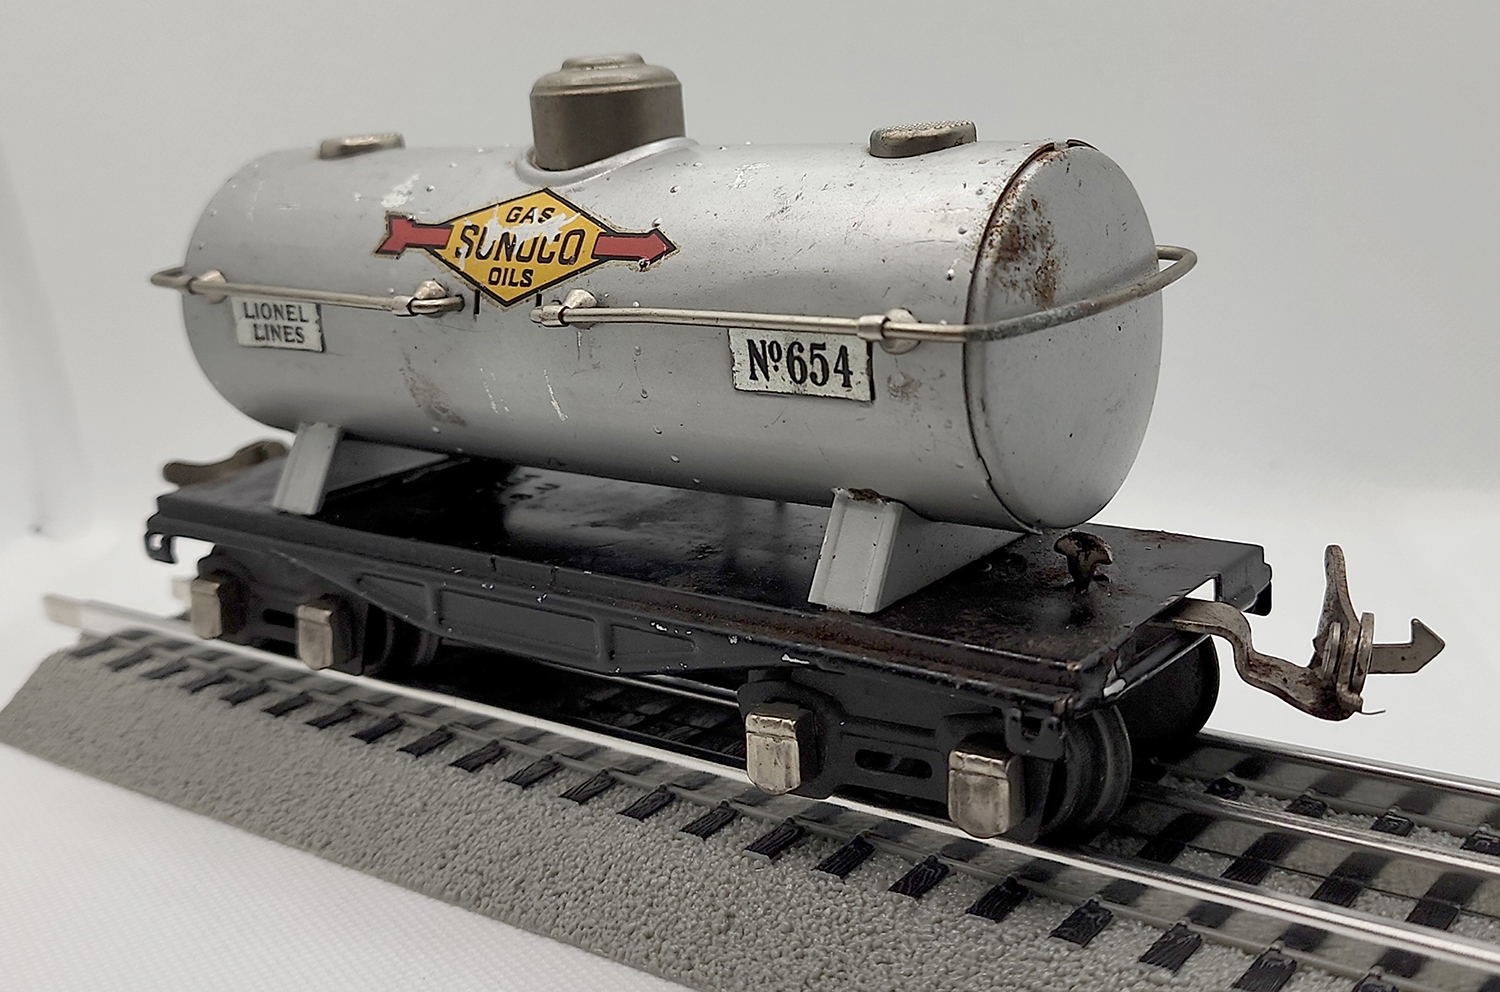 1st view of the Lionel Sunoco Single-Dome #654 Tankcar in my O-scale Collection